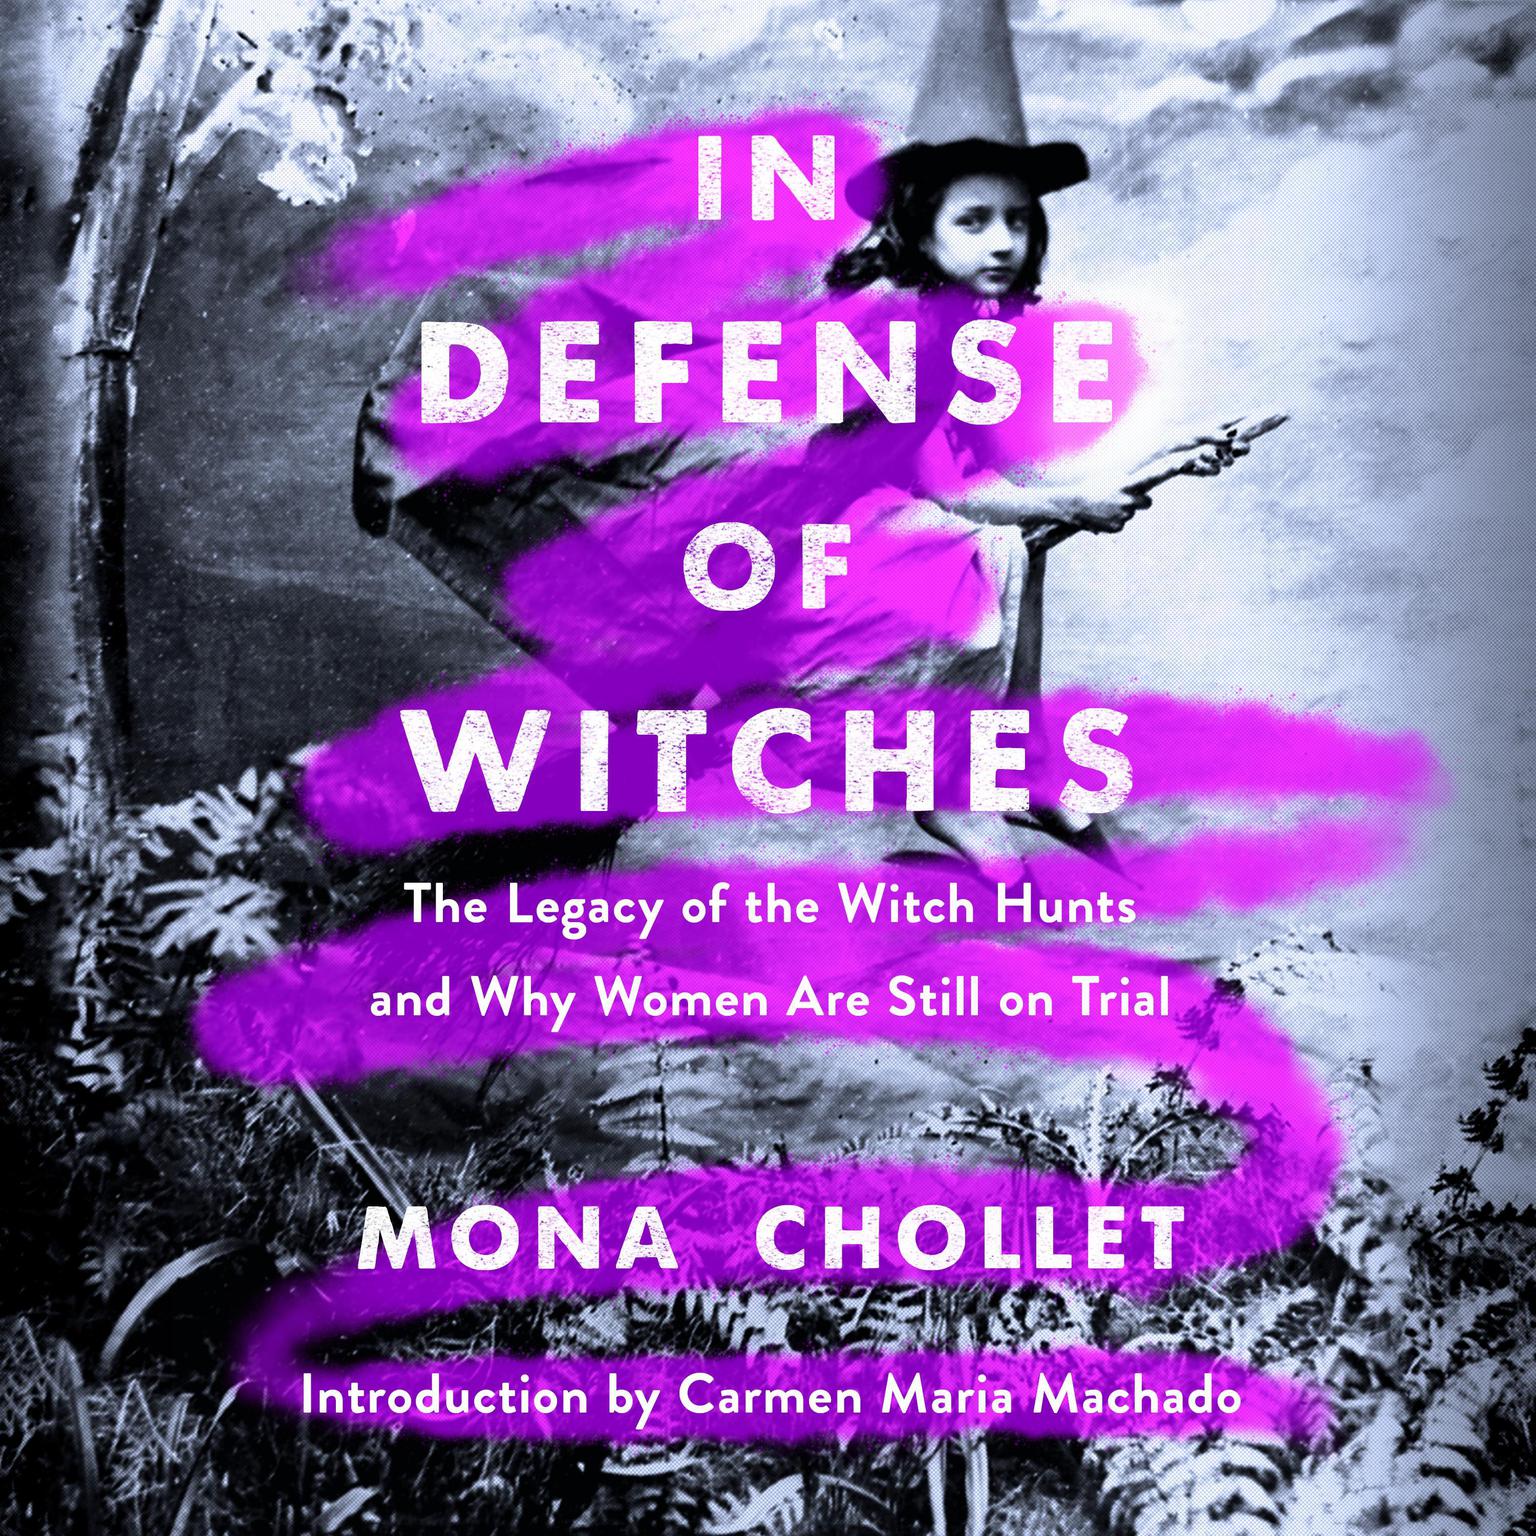 In Defense of Witches: The Legacy of the Witch Hunts and Why Women Are Still on Trial Audiobook, by Mona Chollet